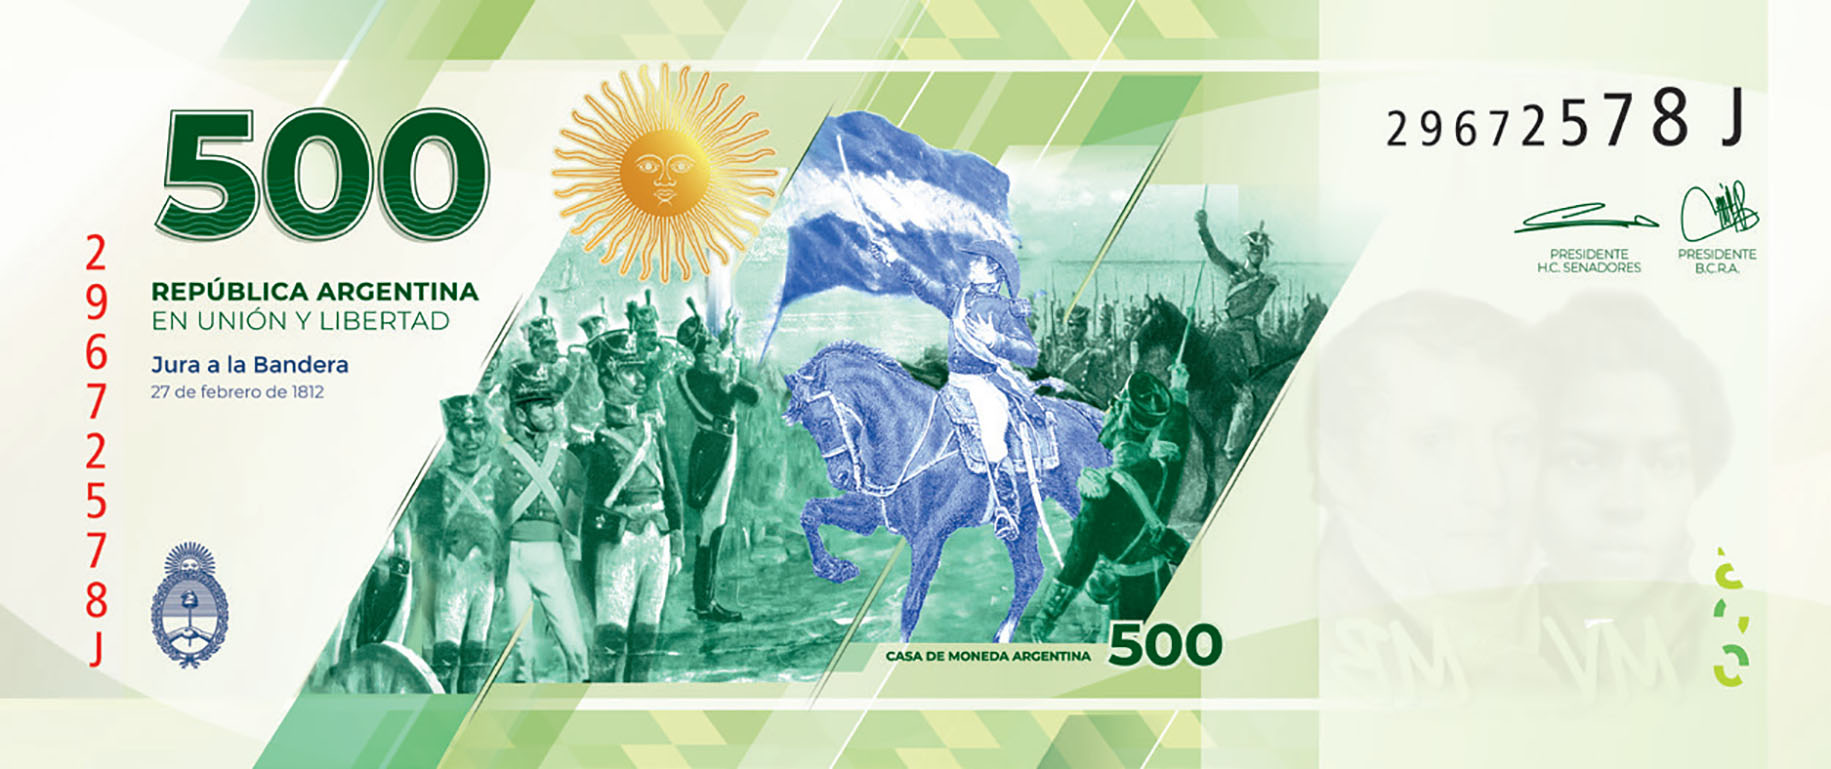 Argentina new 500-peso note (B425a) reported for introduction in Q4 2022 –  BanknoteNews